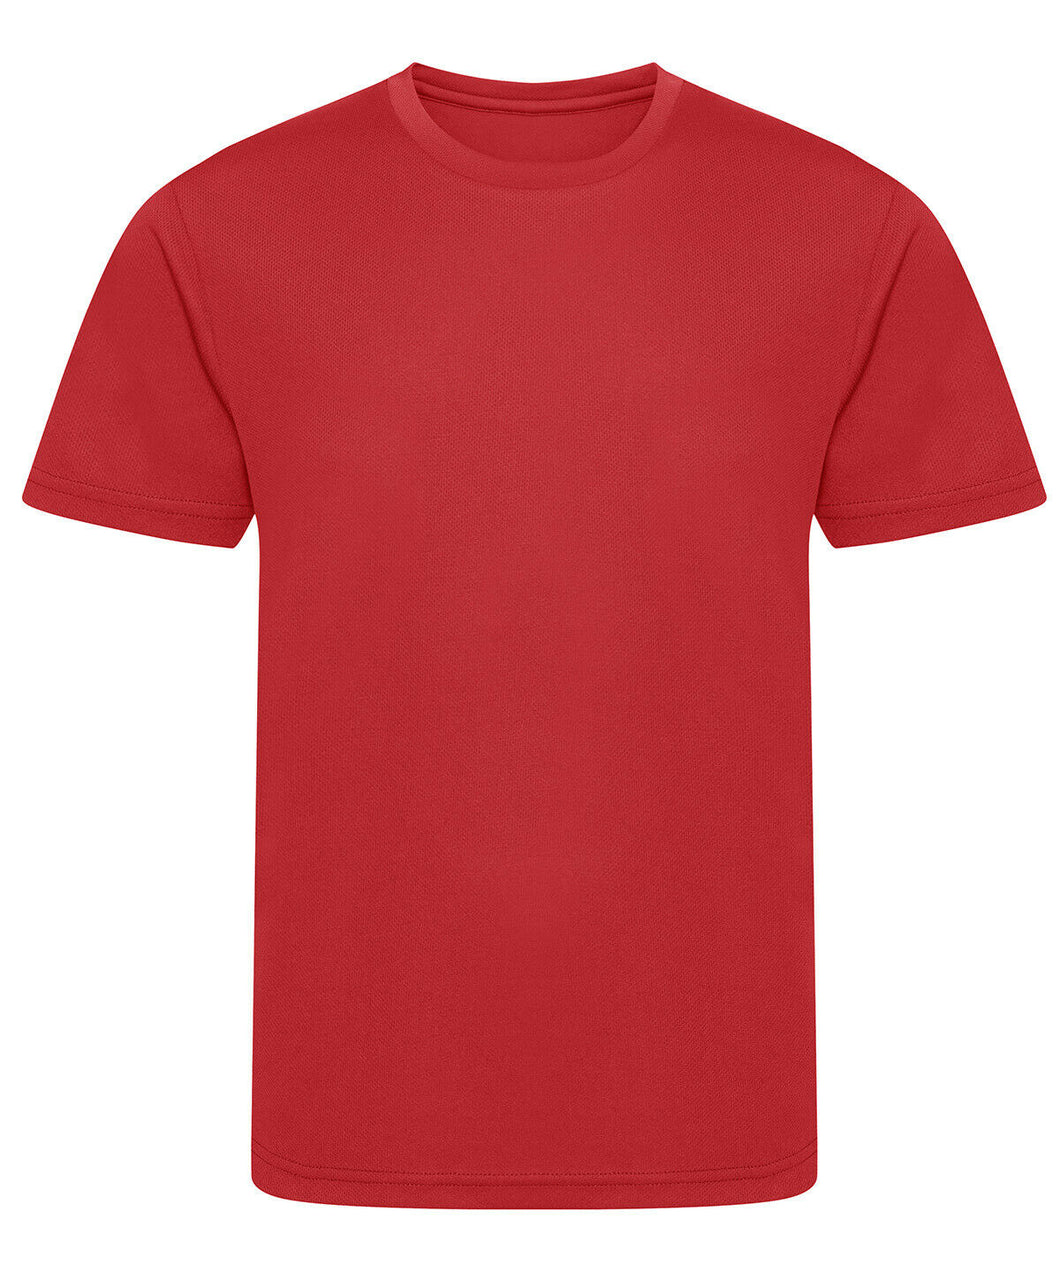 Athletic Sportswear Kids Roly Cool Wick T-Shirt Red